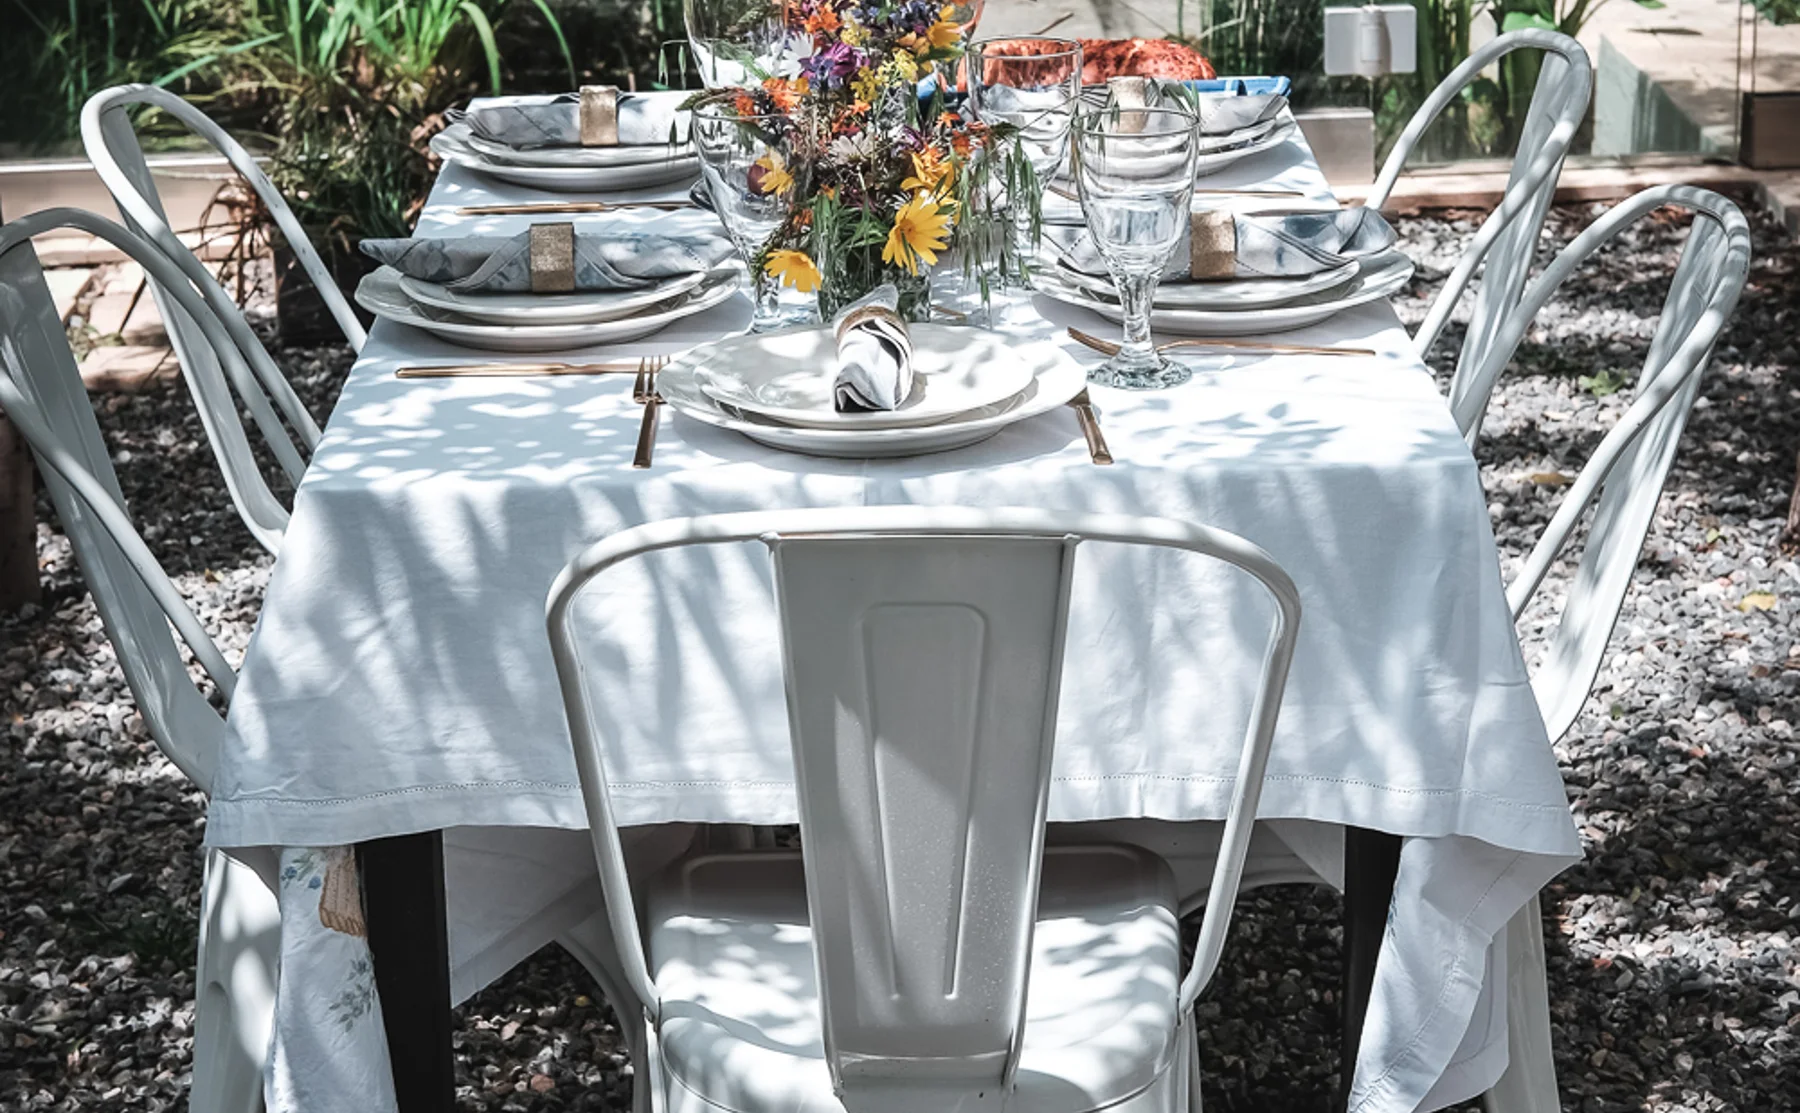 Athens In The Shade: Private Lunch in a Garden  - 1227808